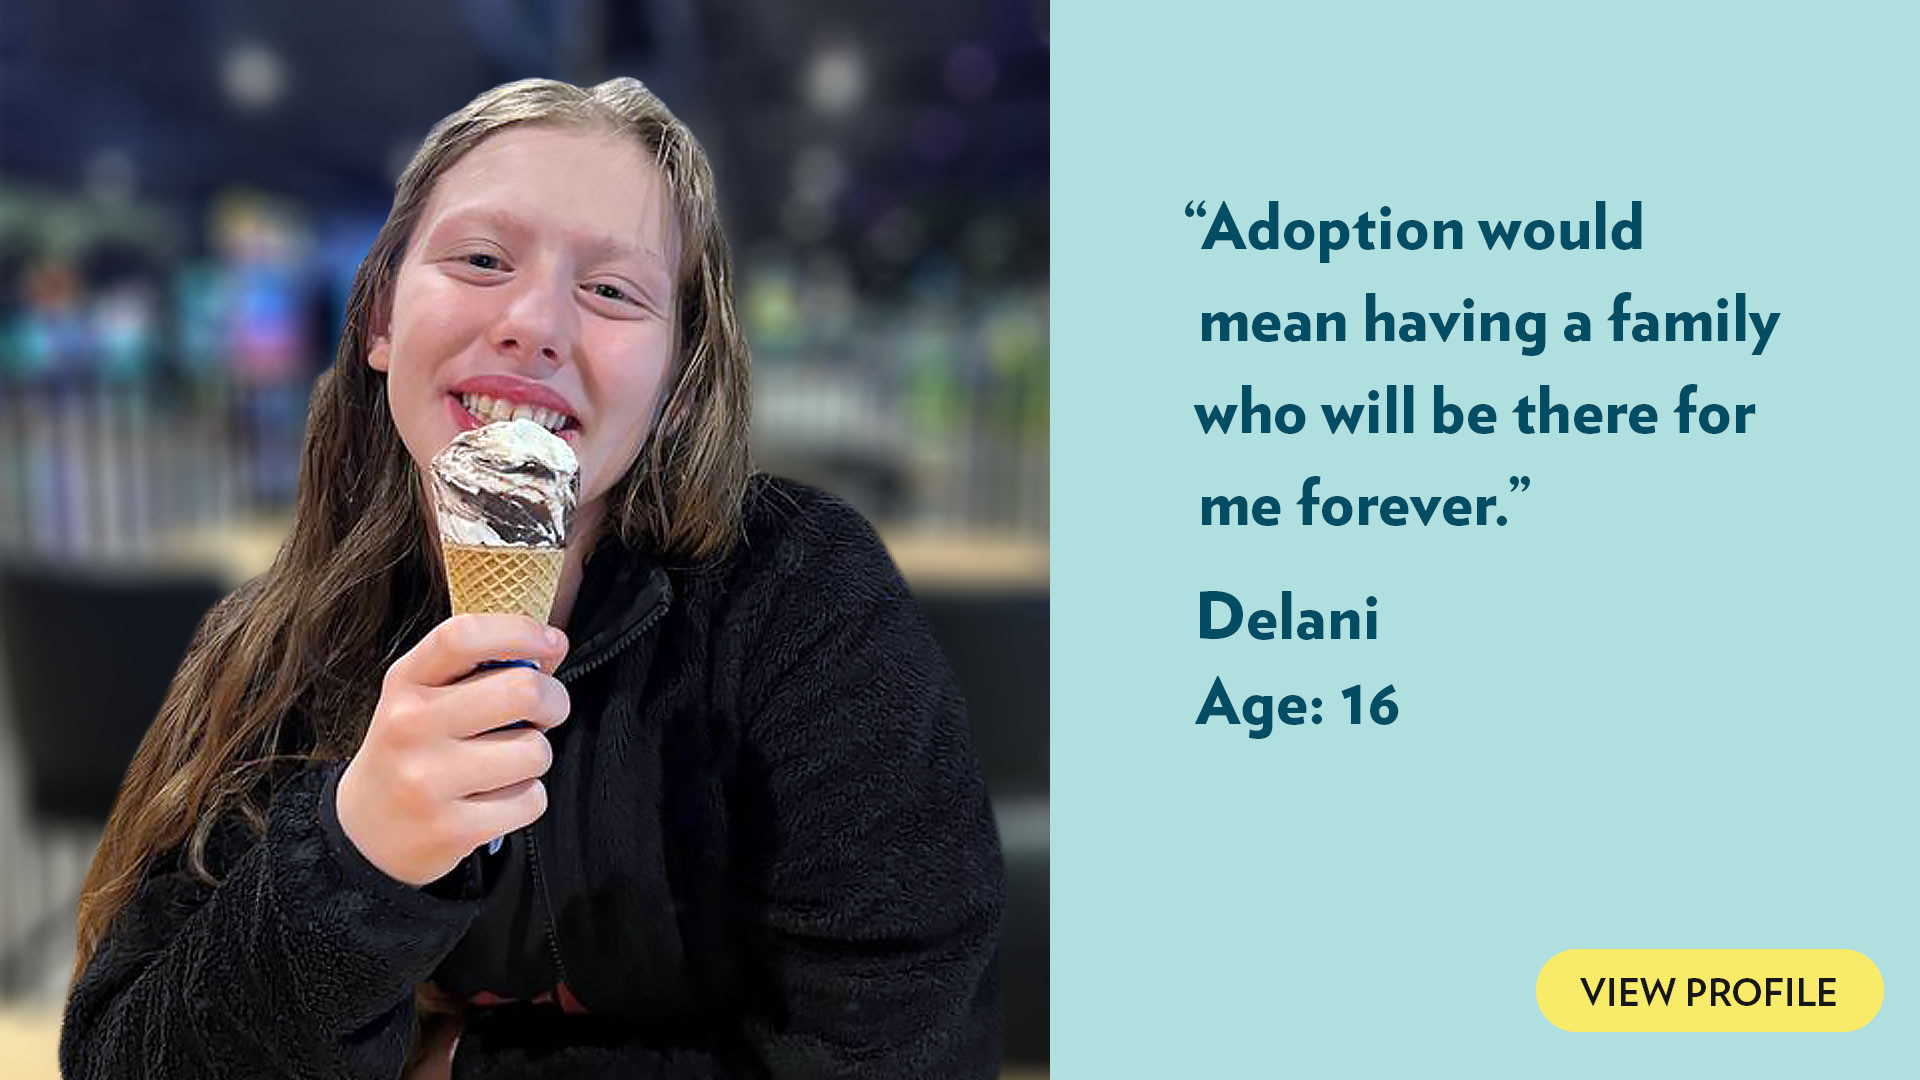 Adoption would mean having a family who will be there for me forever. Delani, age 16. View profile.